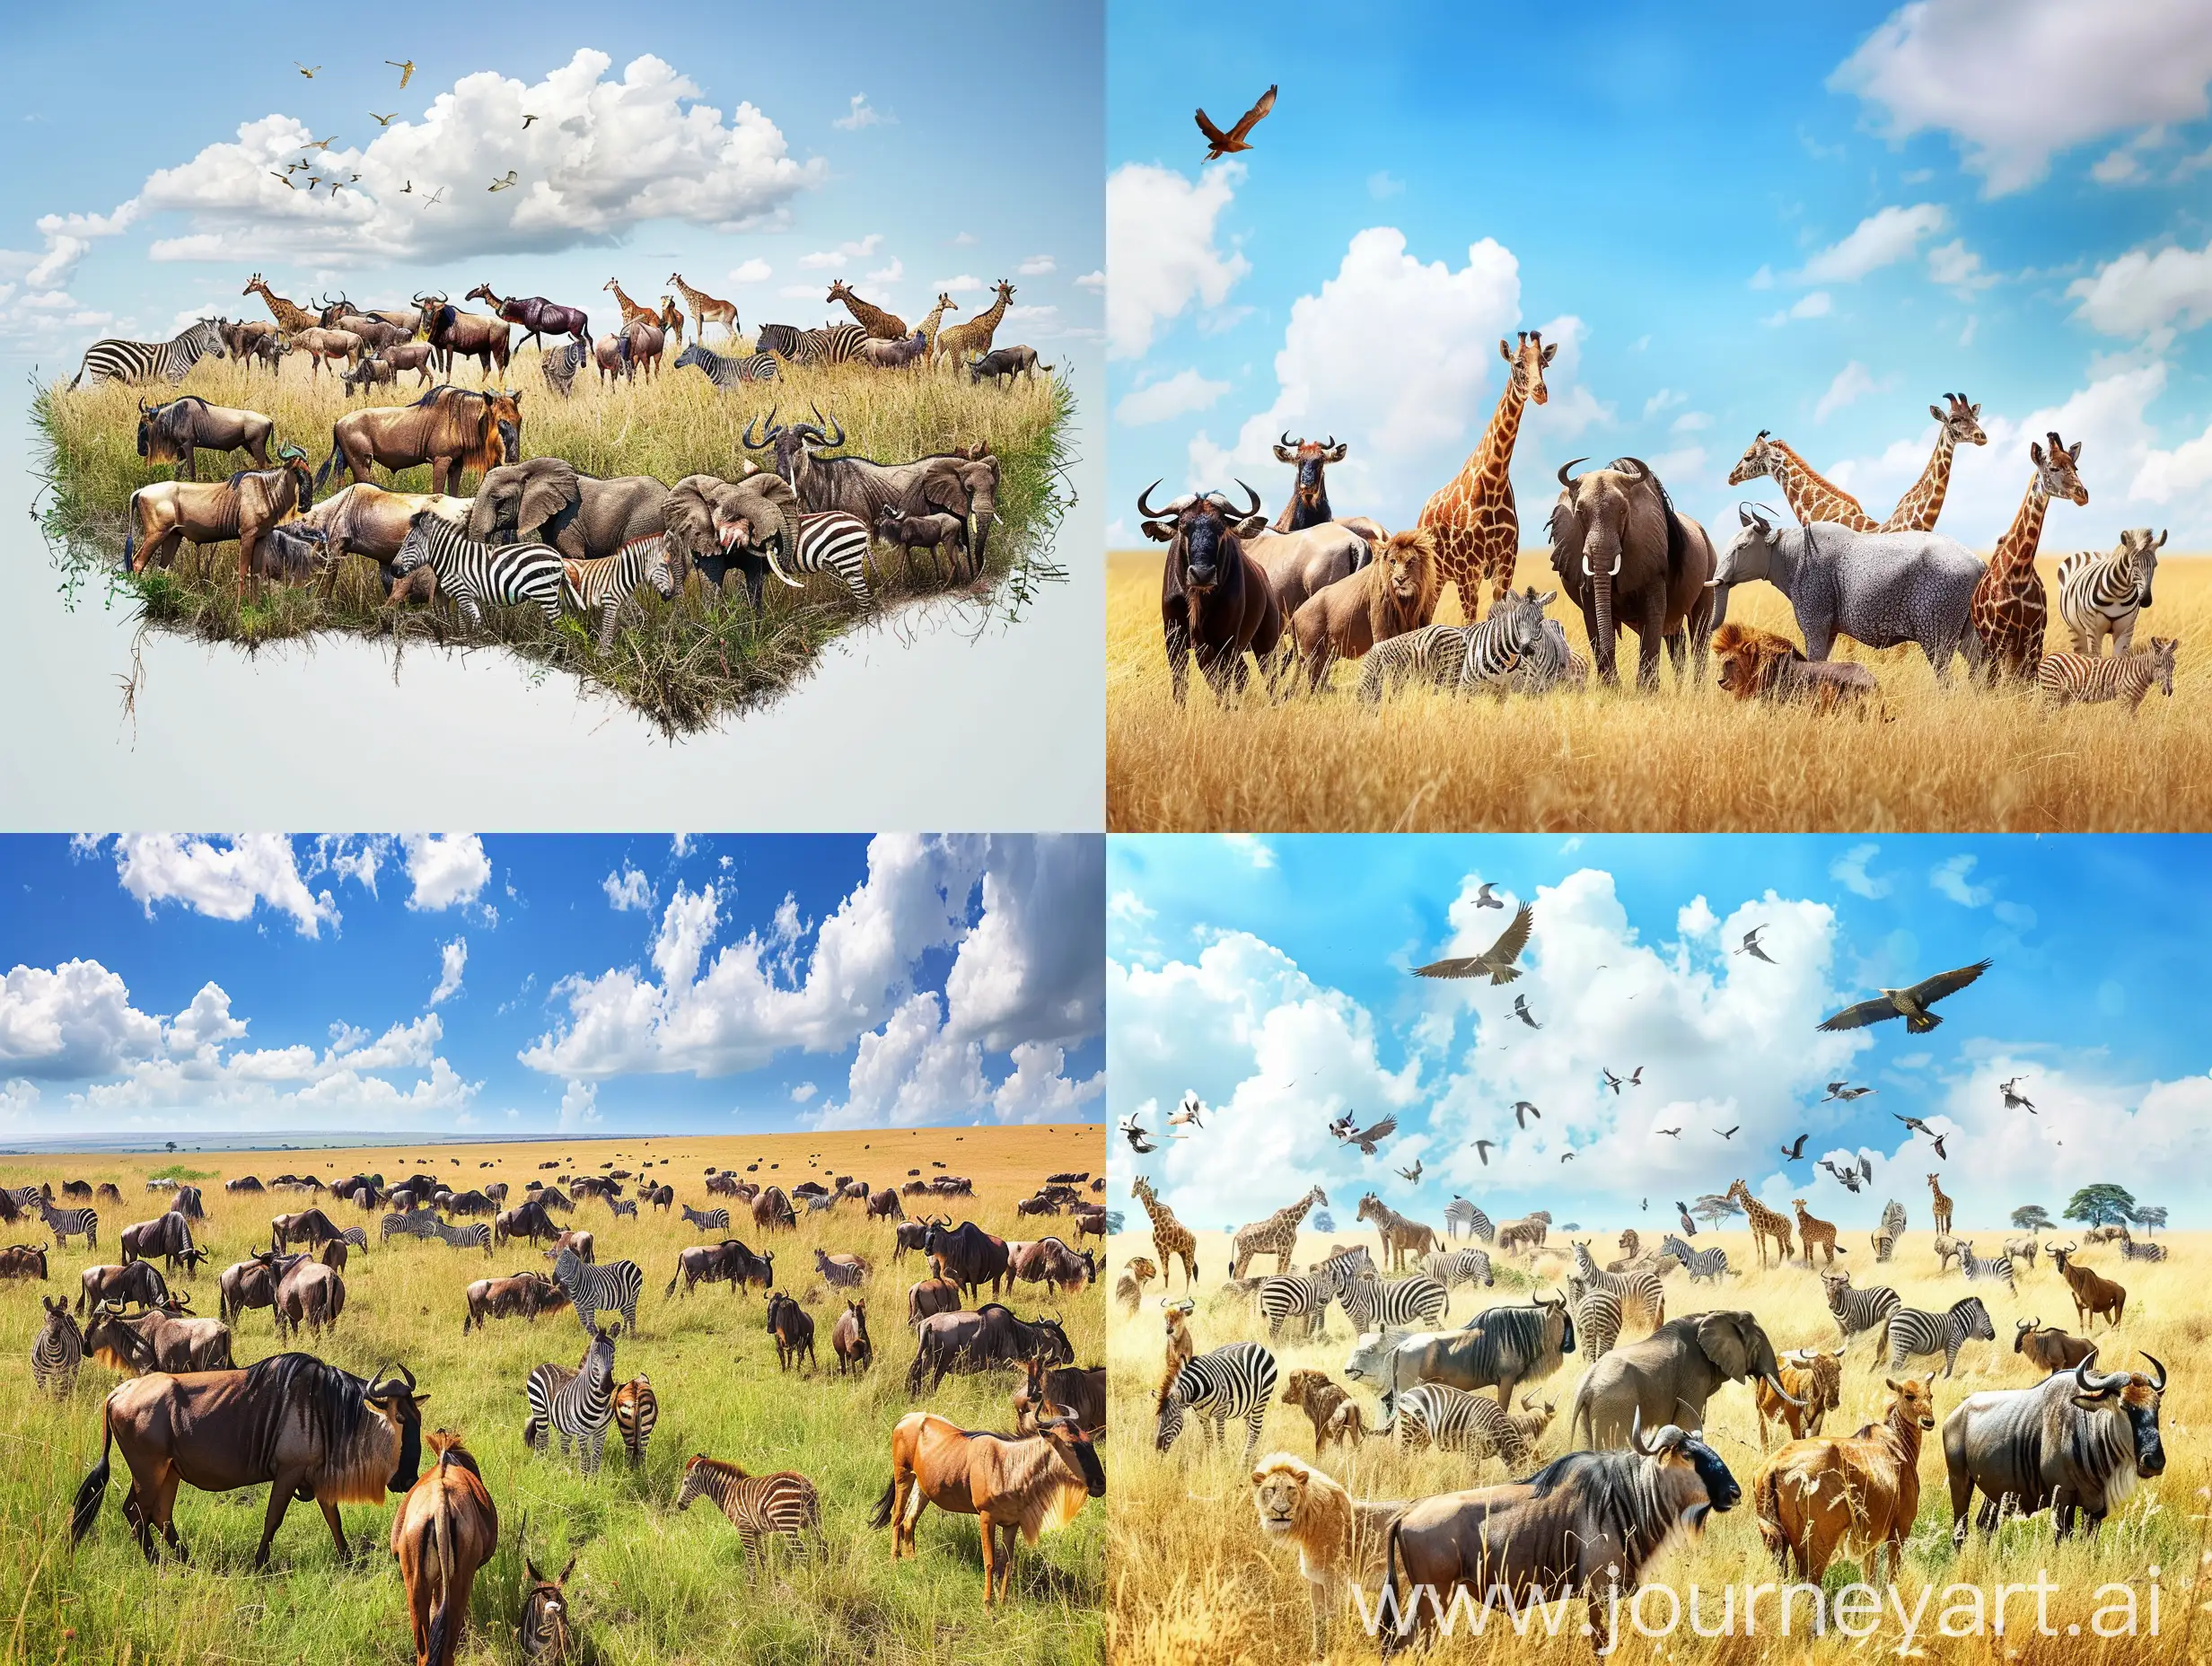 Large group of African safari animals composited together in a scene of the grasslands of Kenya